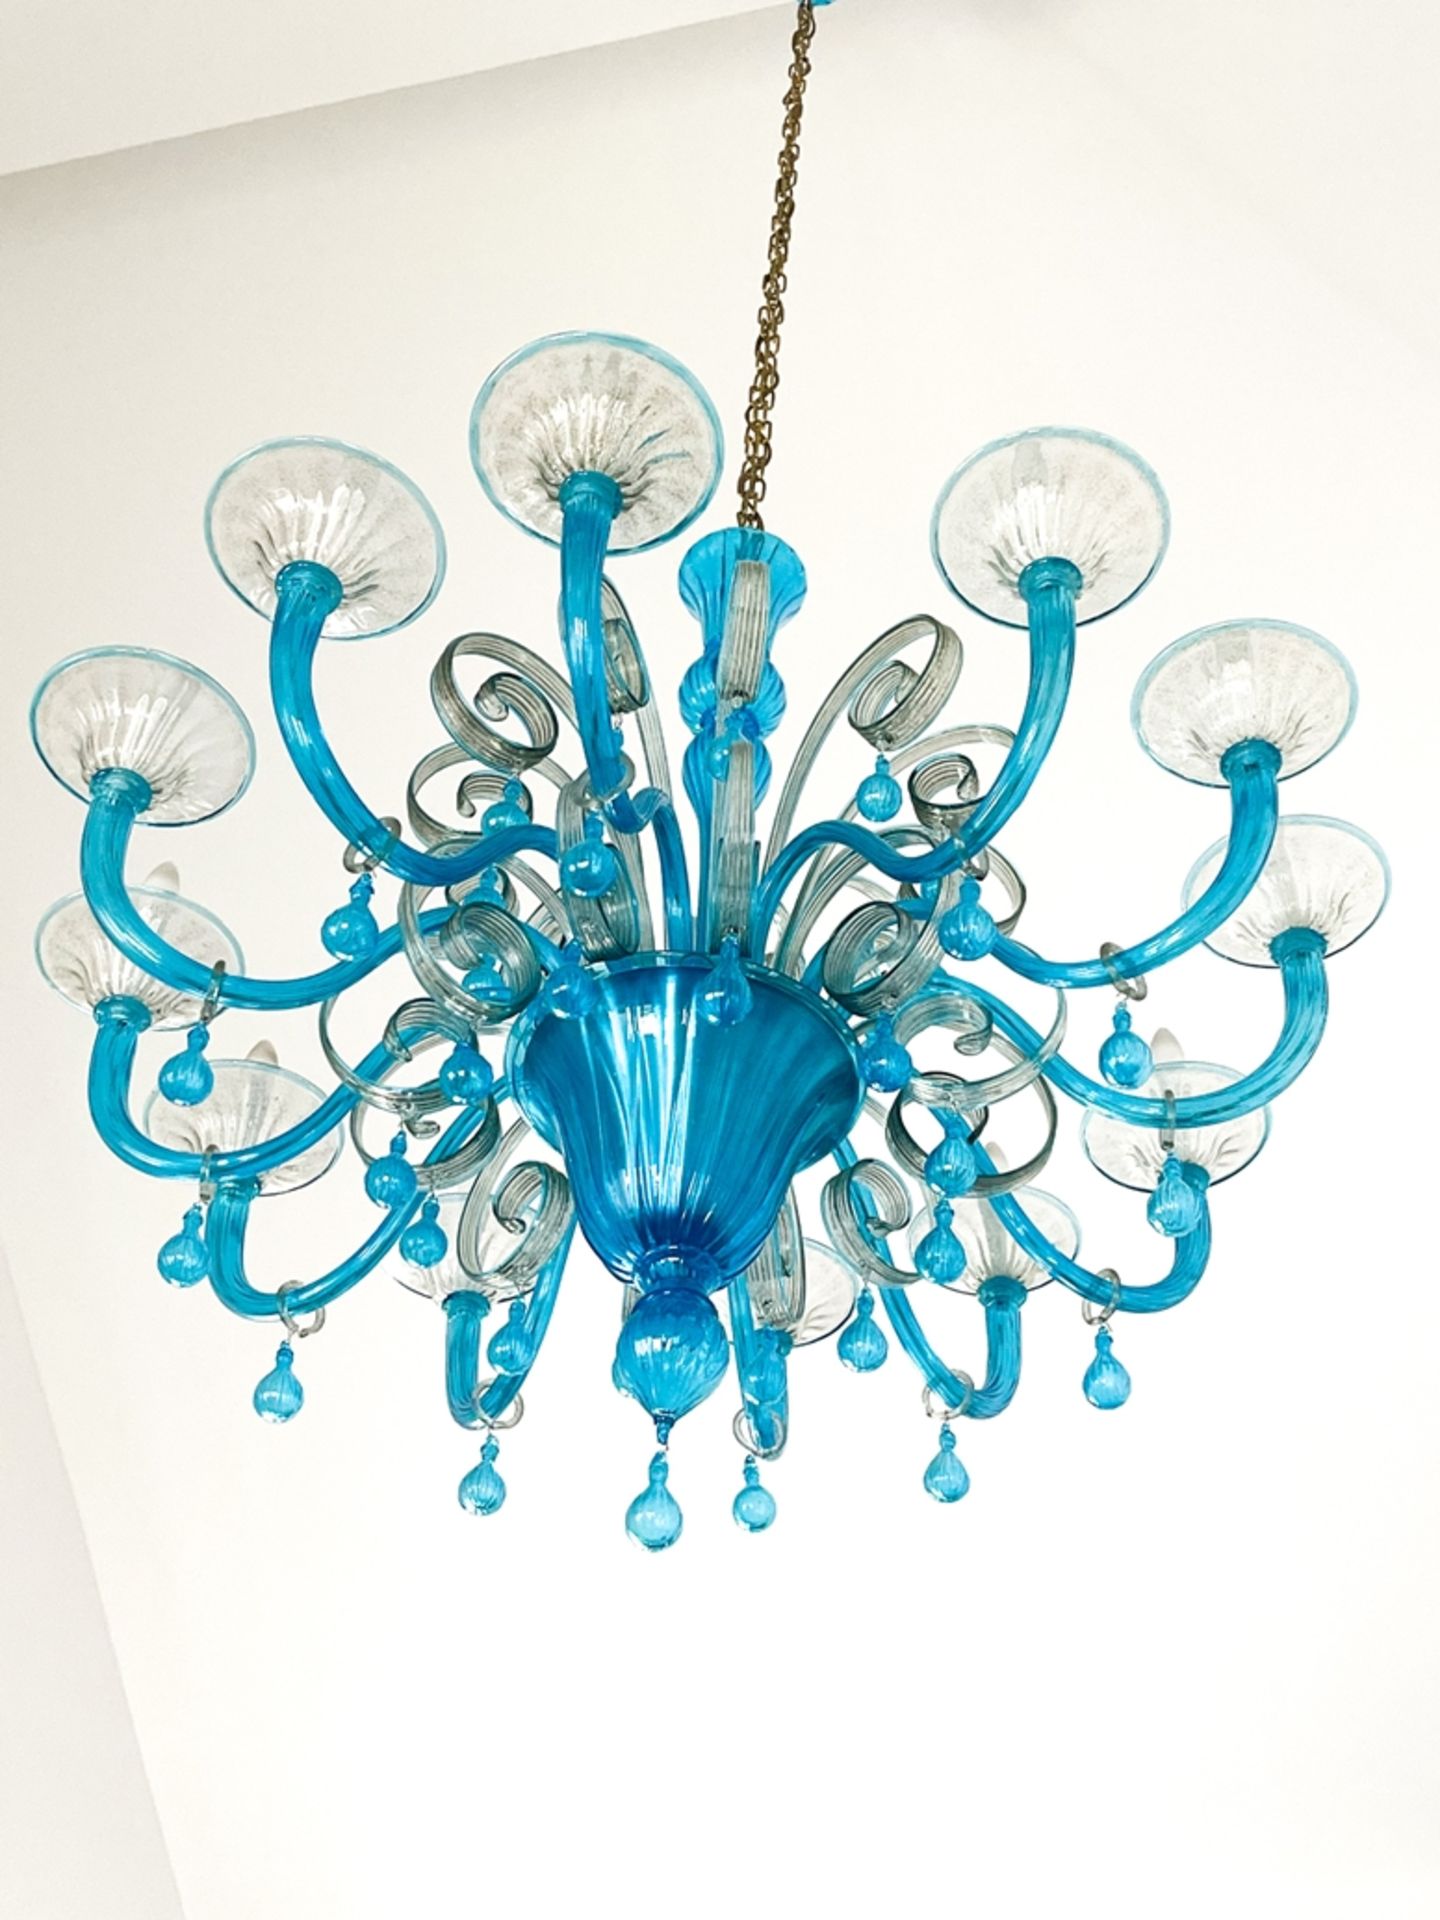 Monumental blur Murano chandelier / 1 of 2, - Image 3 of 5